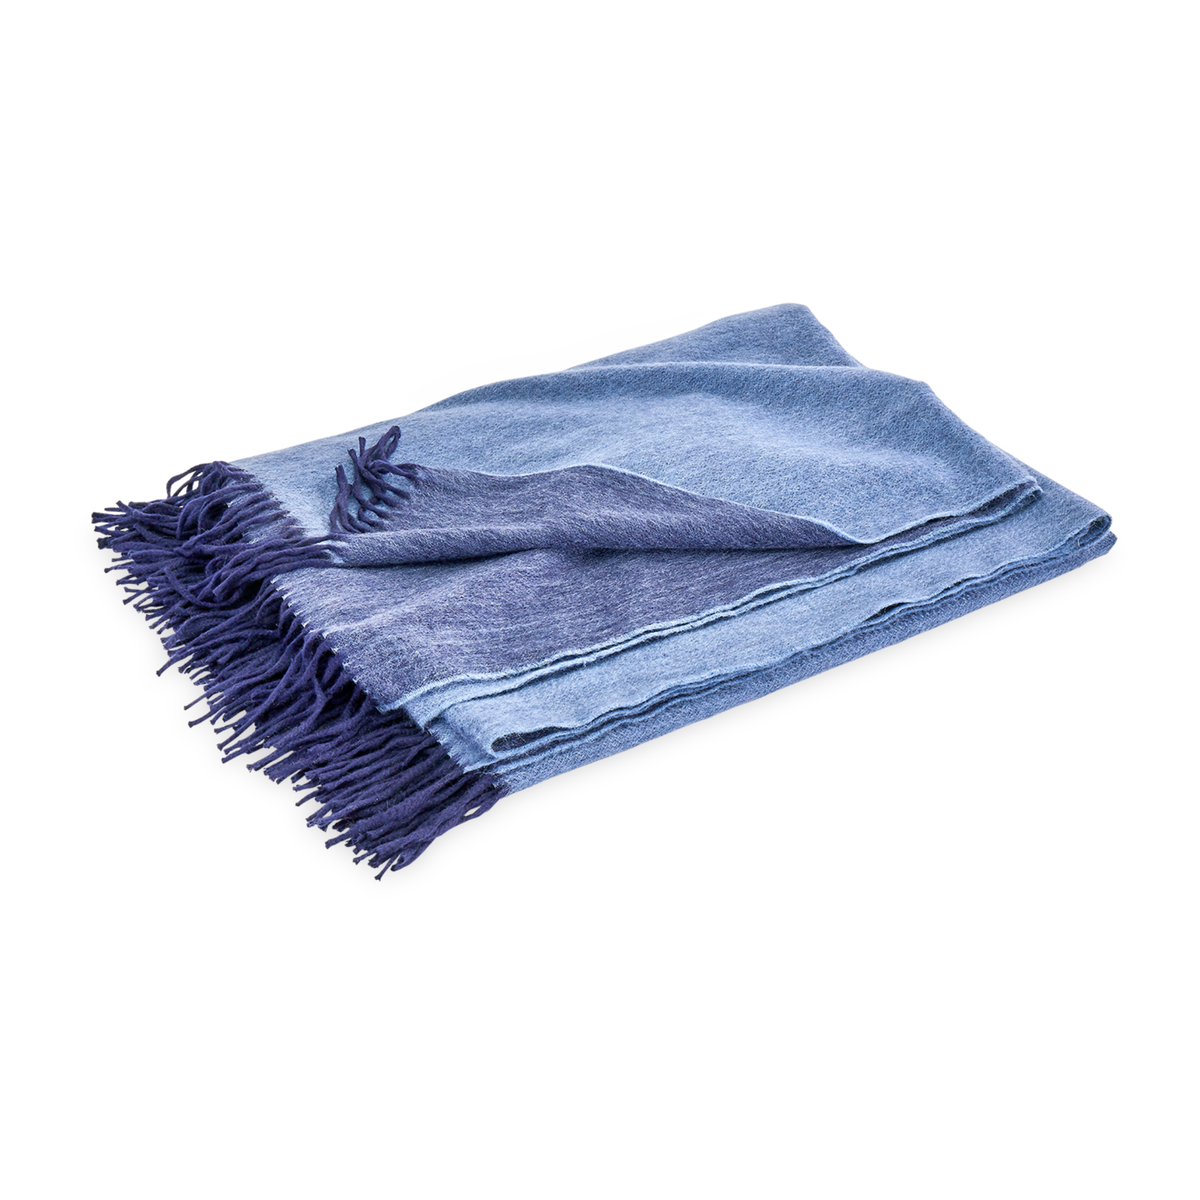 Folded Matouk Paley Throws in Navy and Chambray Color